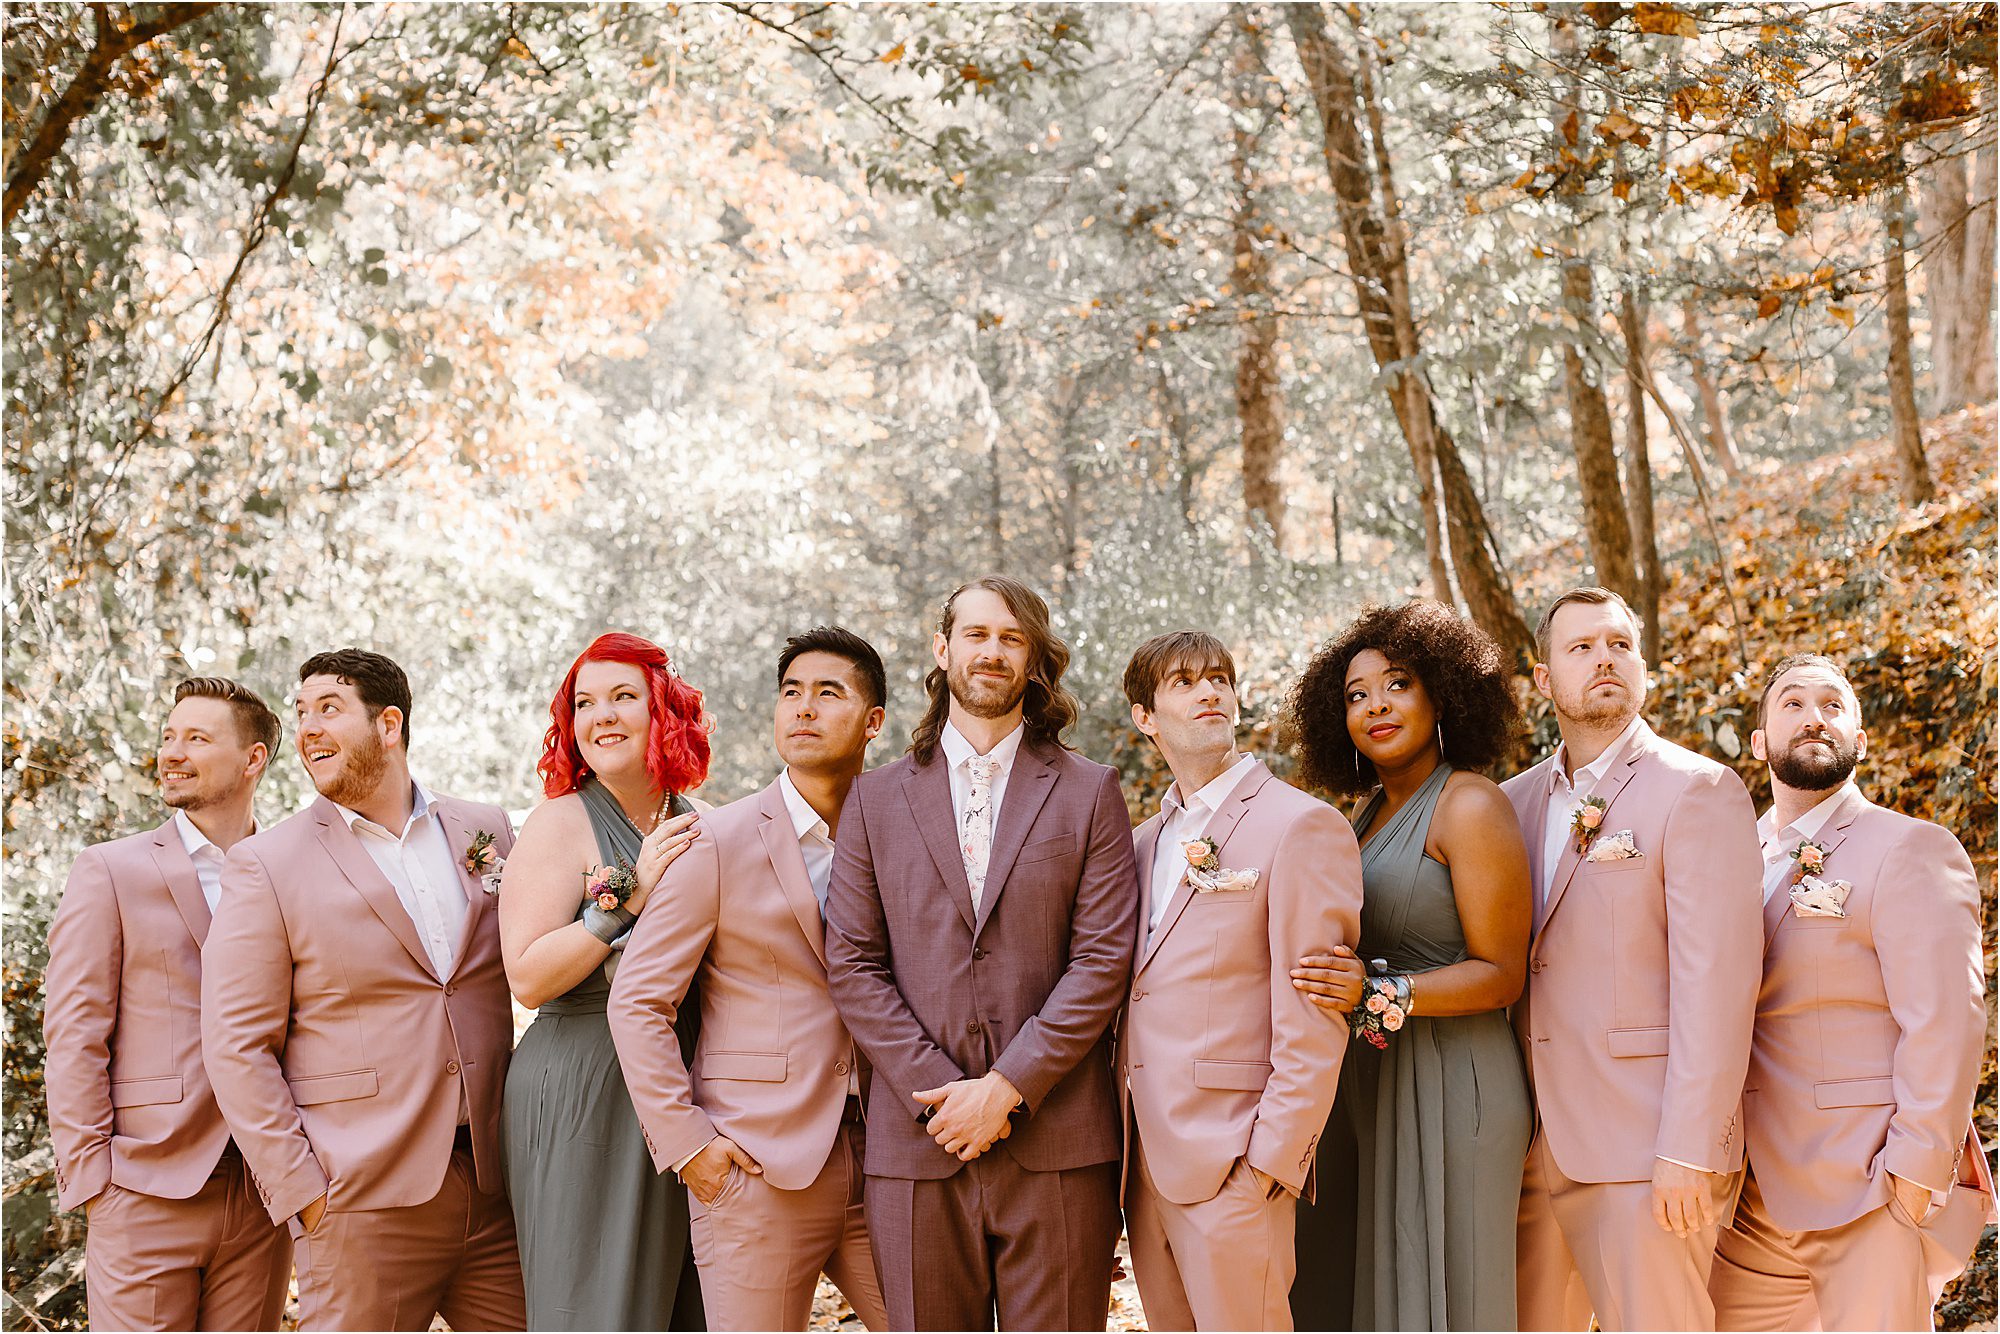 groom standing with wedding party in pink and burgundy suits and green dresses